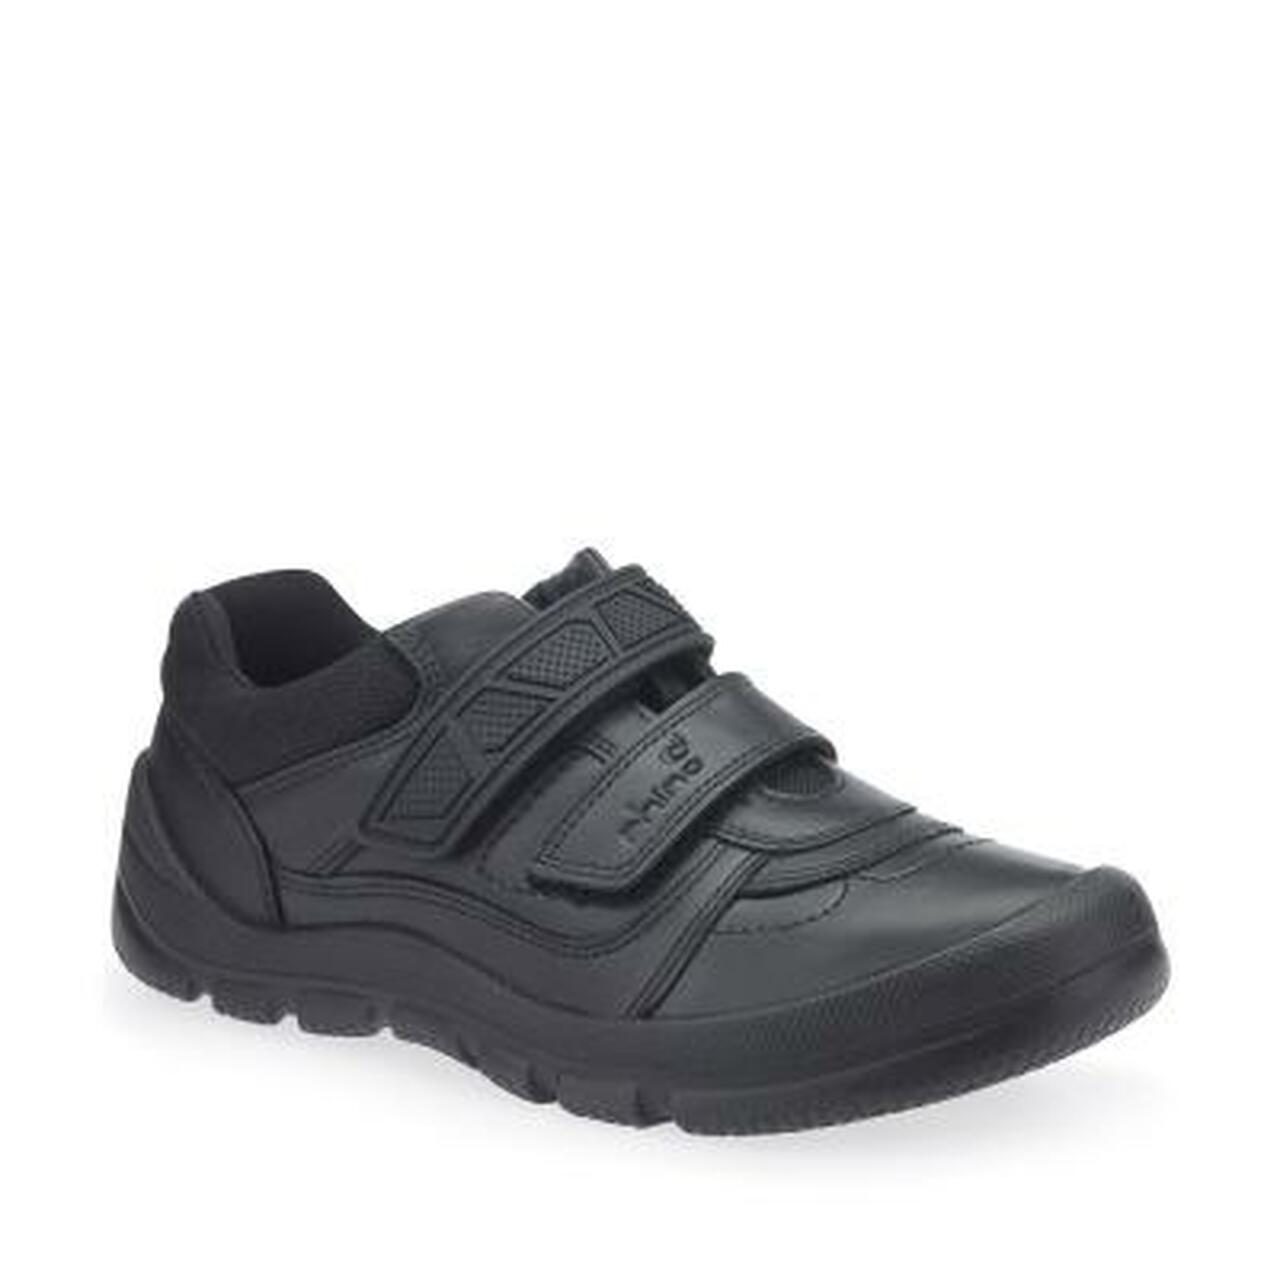 A boys school shoe by Start Rite, style Warrior, in black leather with double velcro fastening. Angled view.